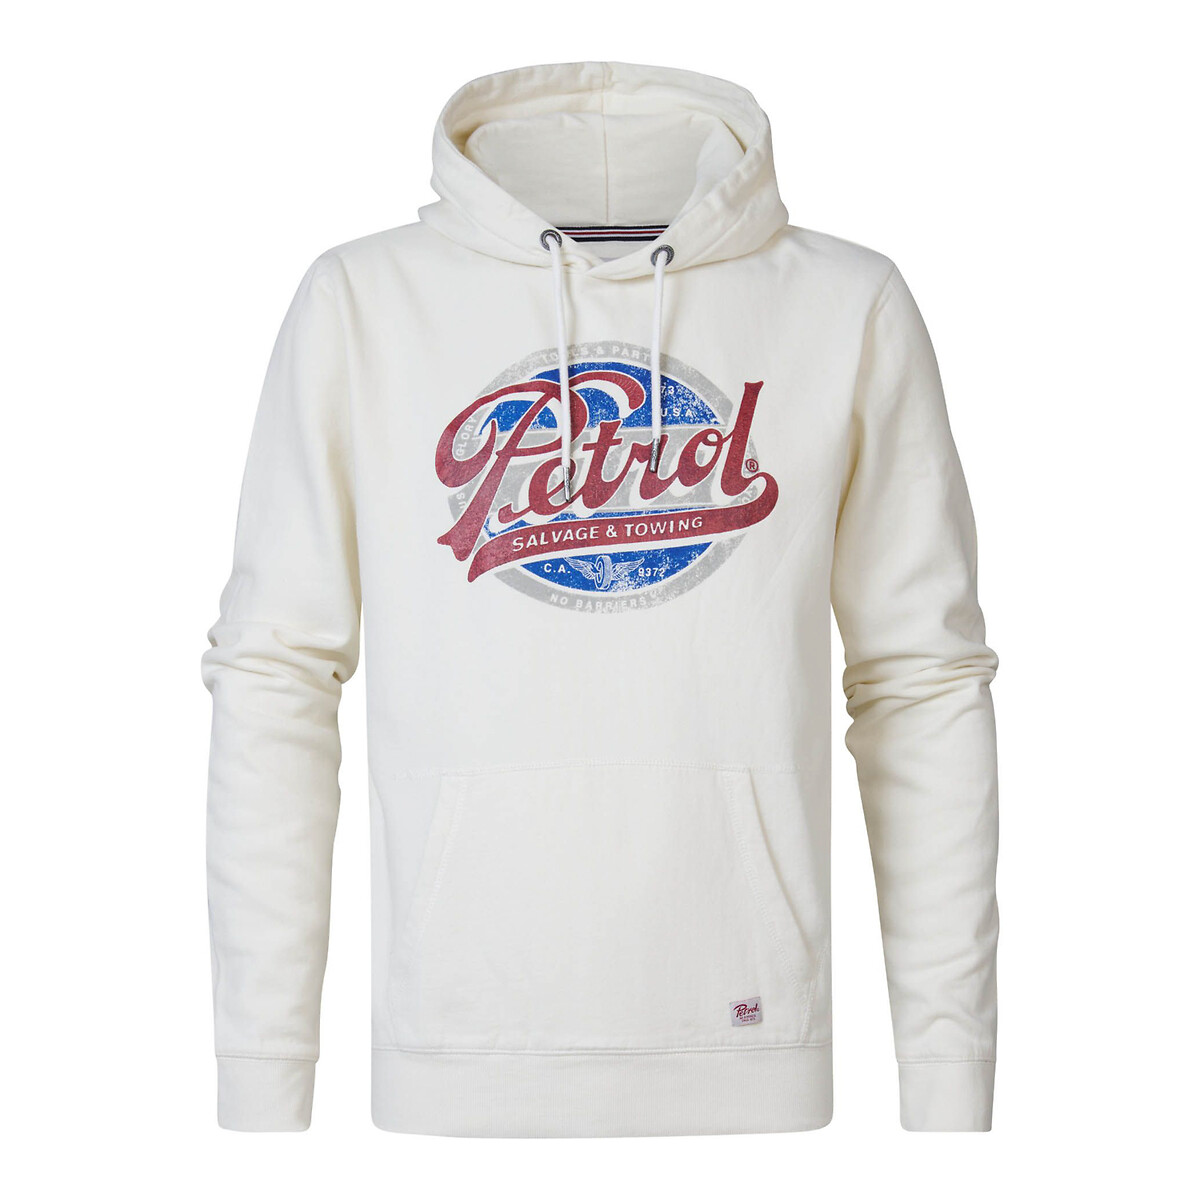 Cotton Crew Neck Hoodie with Print on Front